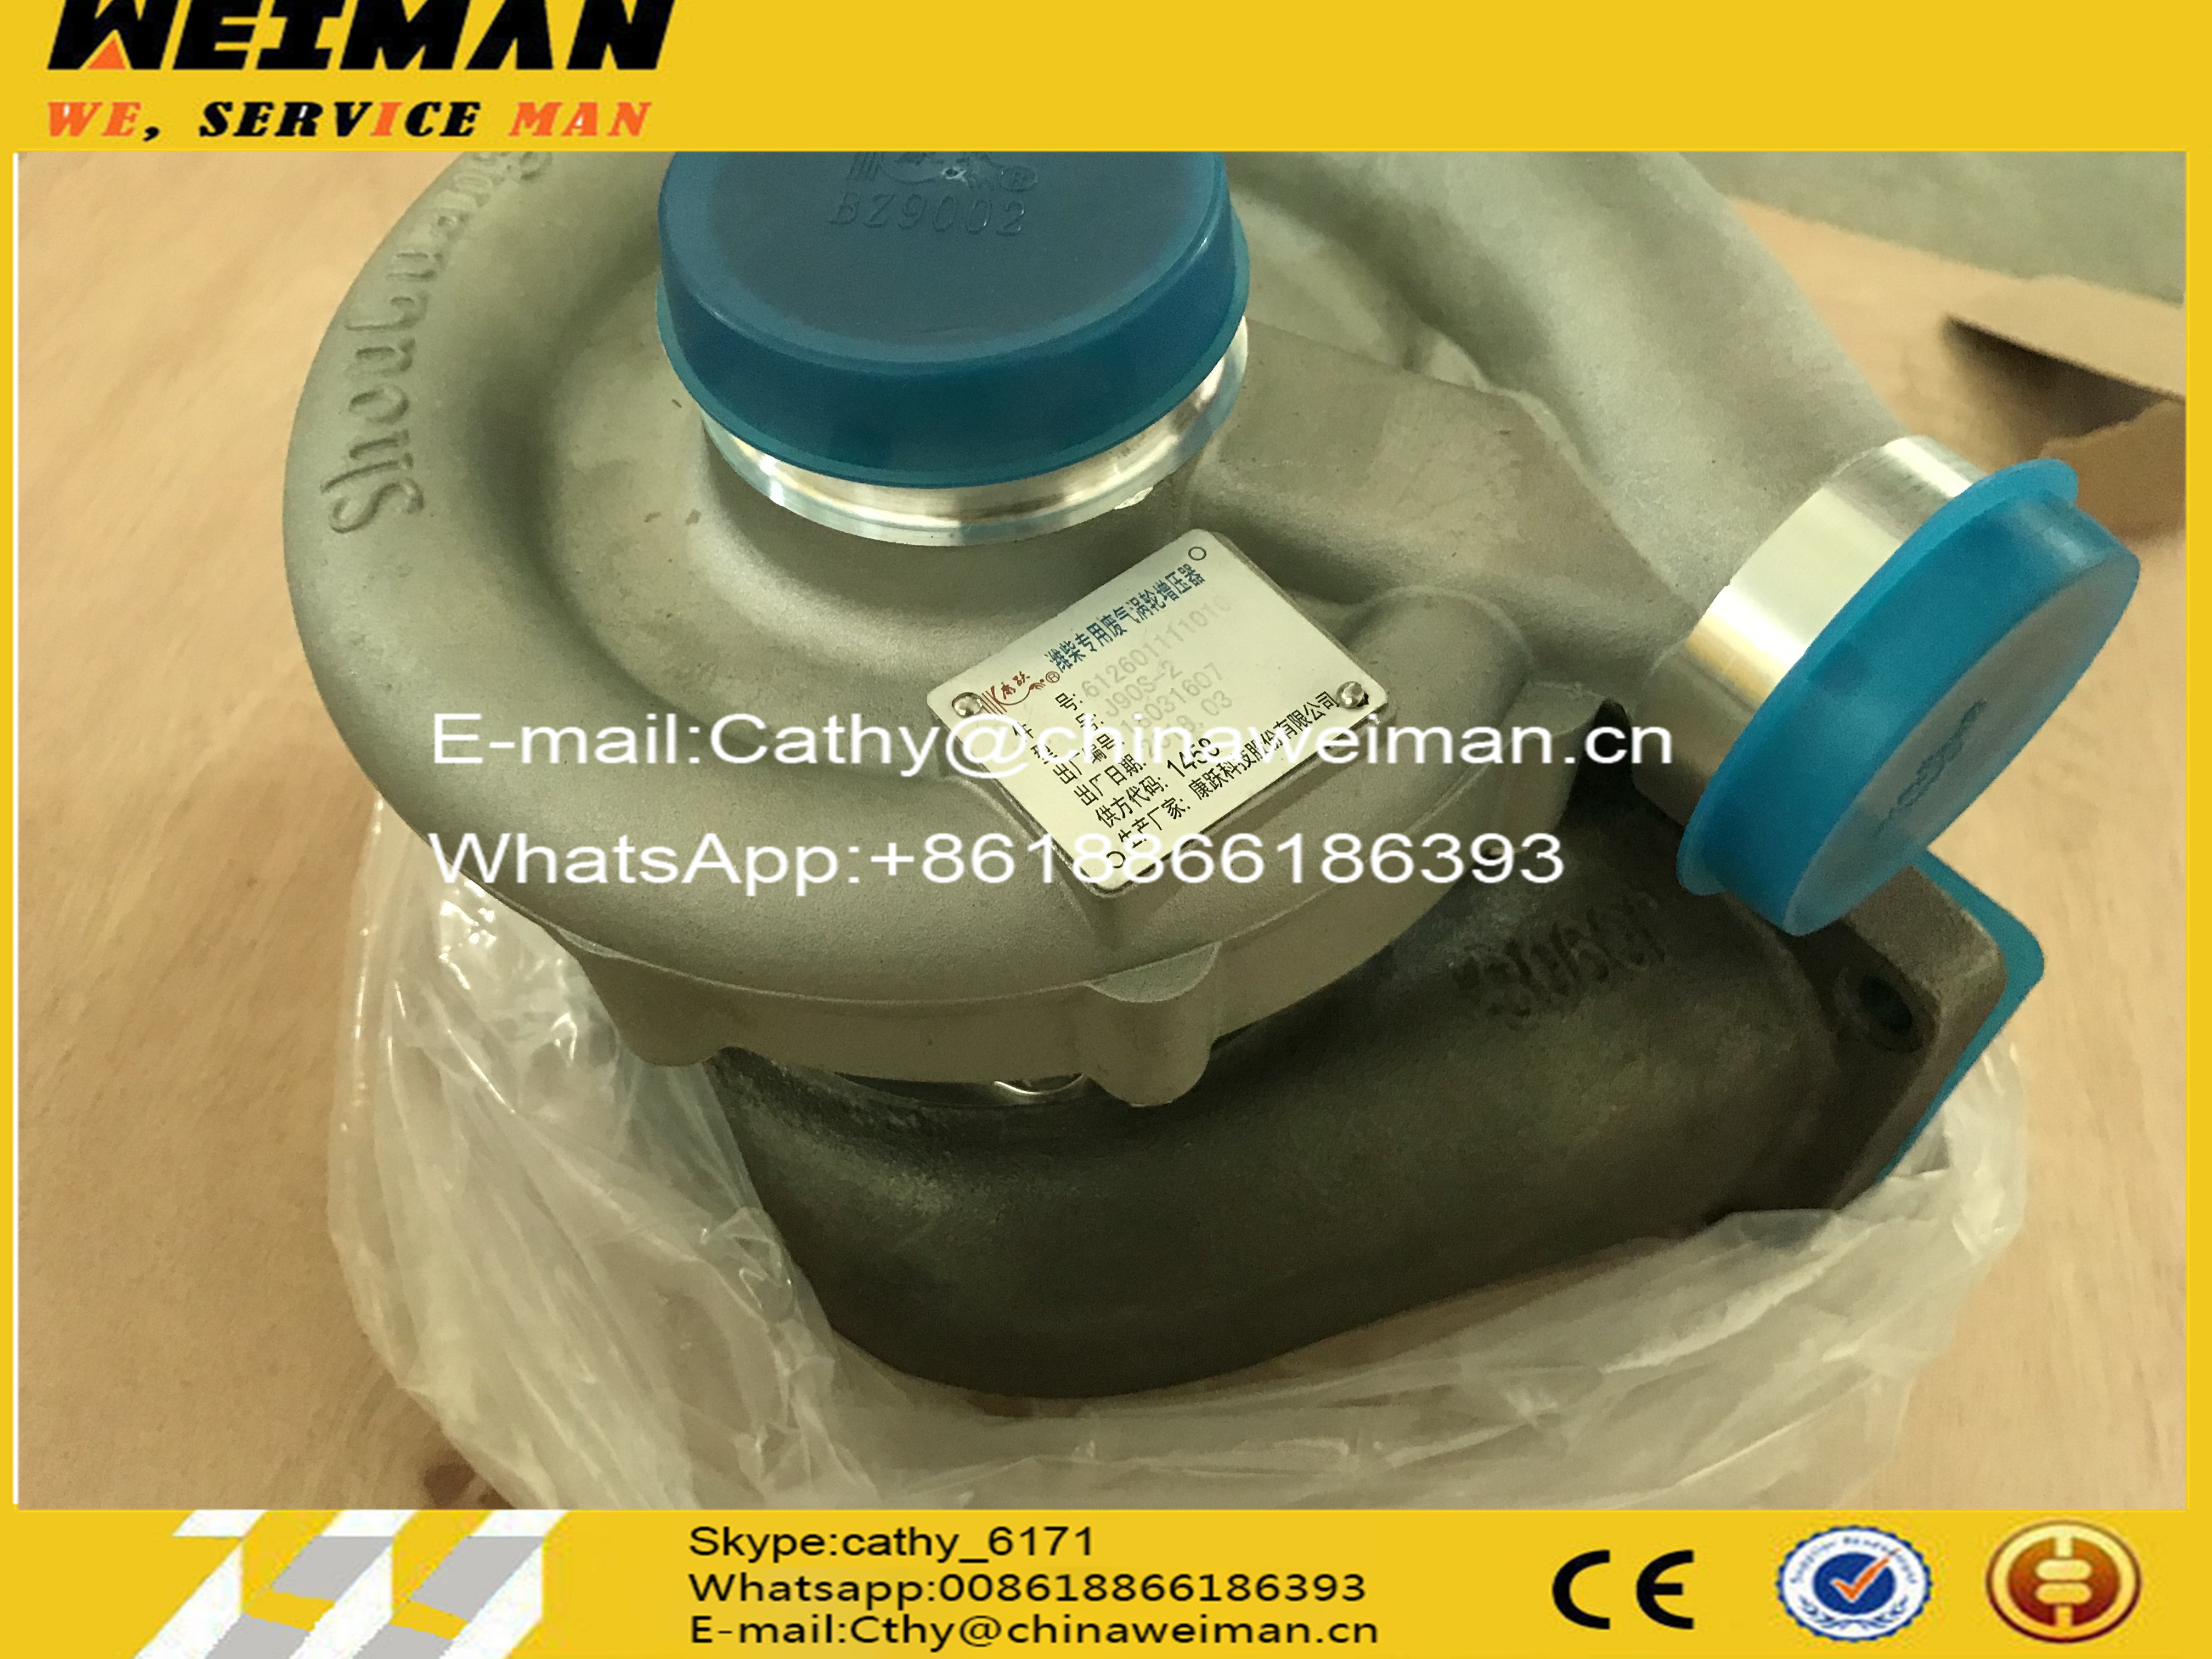 SDLG LG956L LG958L Wheel Loader Spare parts 4110001015031 Turbocharger with Weichai WD615 engine